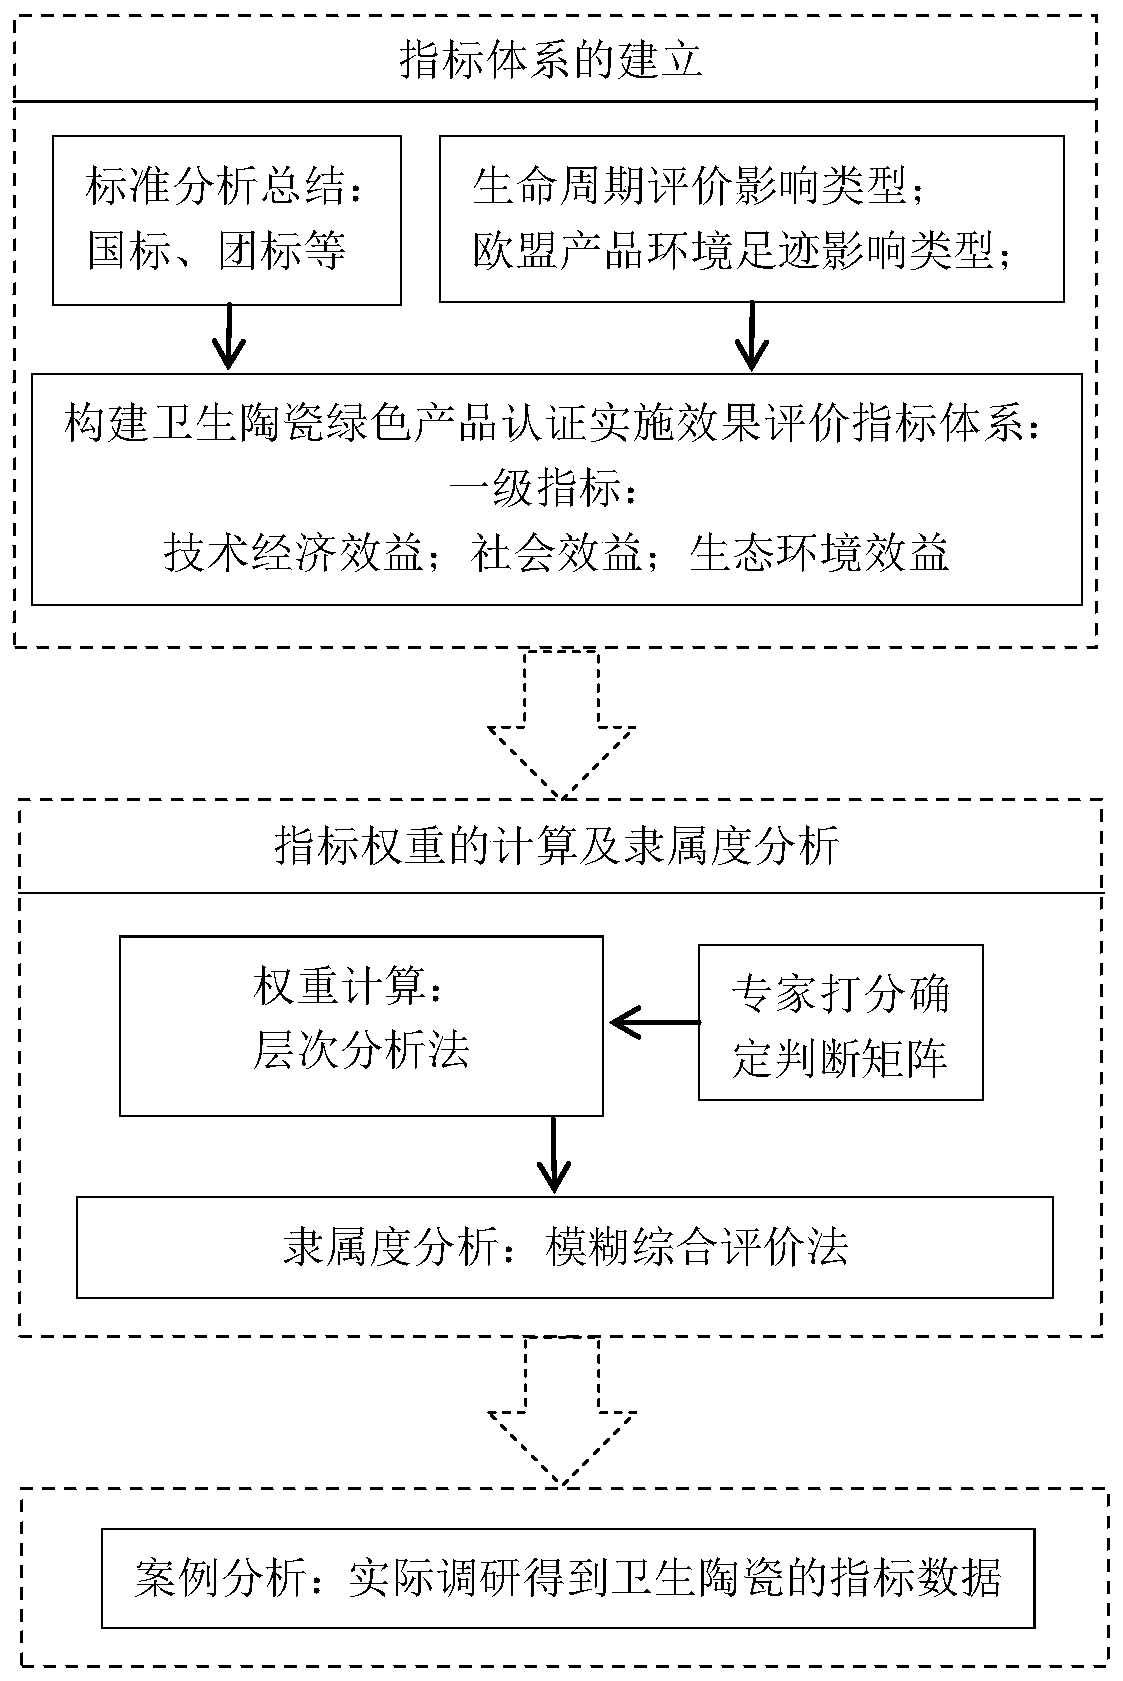 Sanitary ceramic green product authentication implementation effect evaluation method